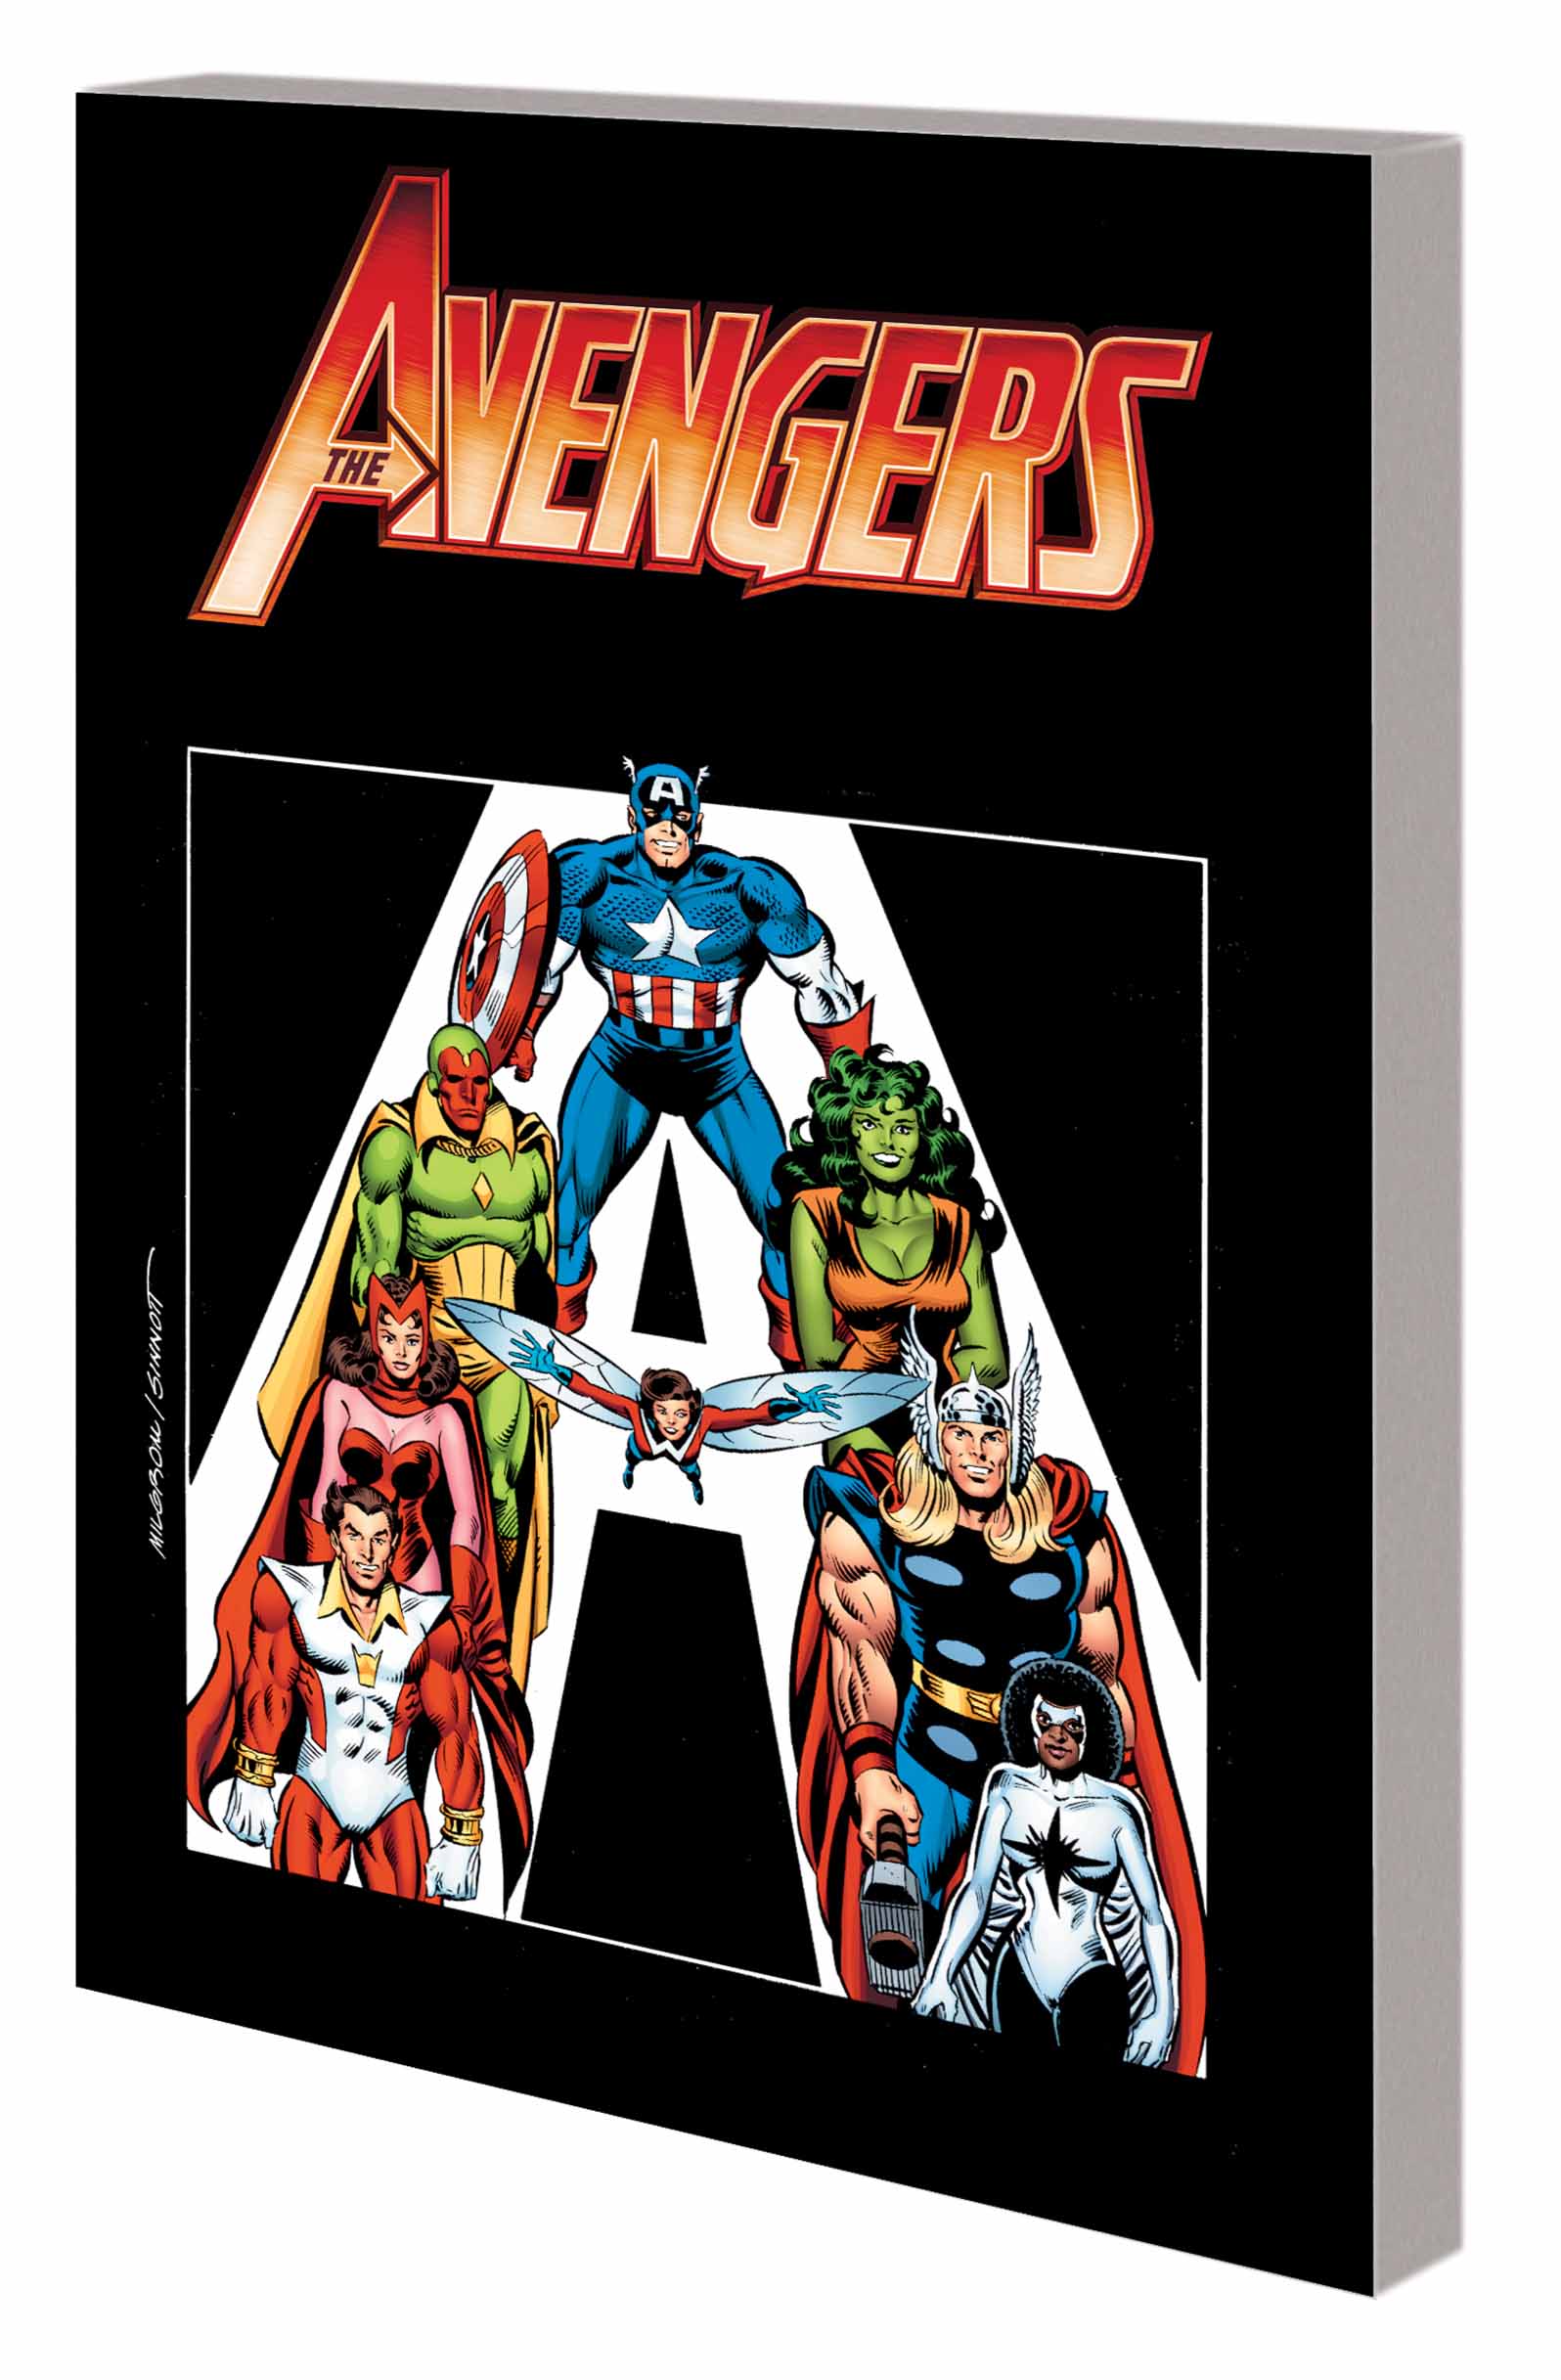 Avengers: Absolute Vision (Trade Paperback)